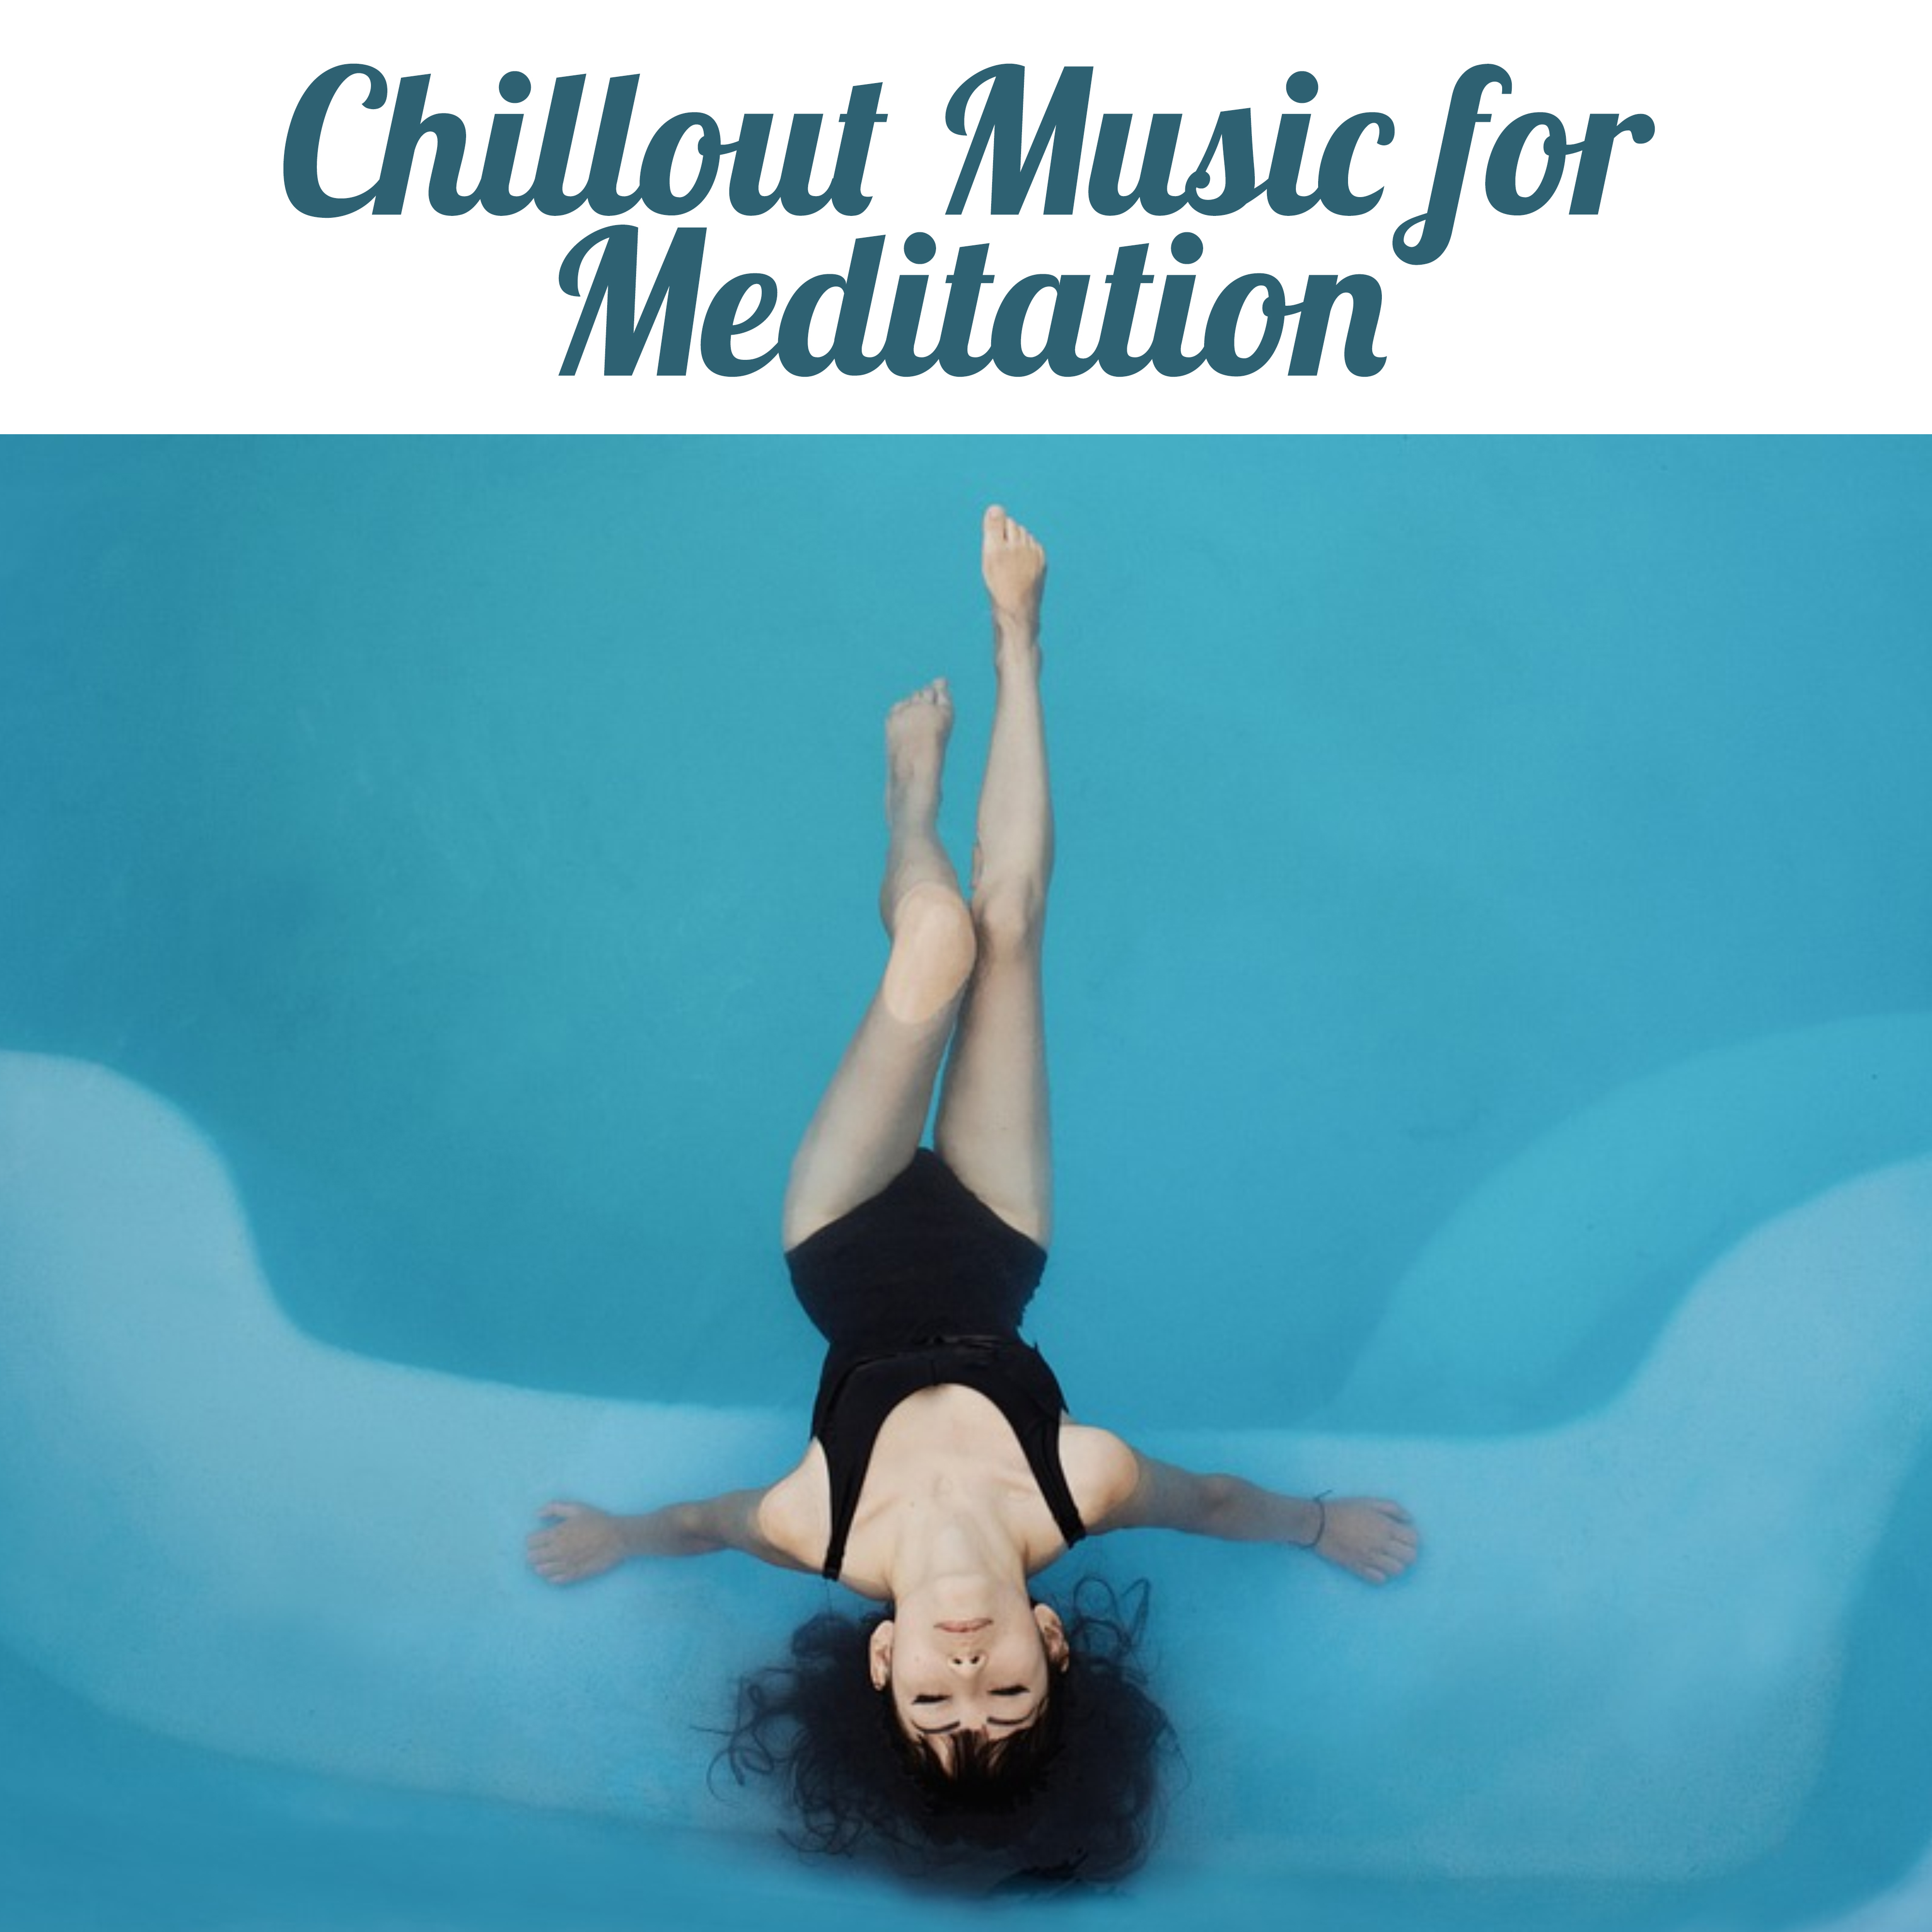 Chillout Music for Meditation – Best Chillout Music, Calming Sounds to Relax, Meditation Music, Relaxing Sounds